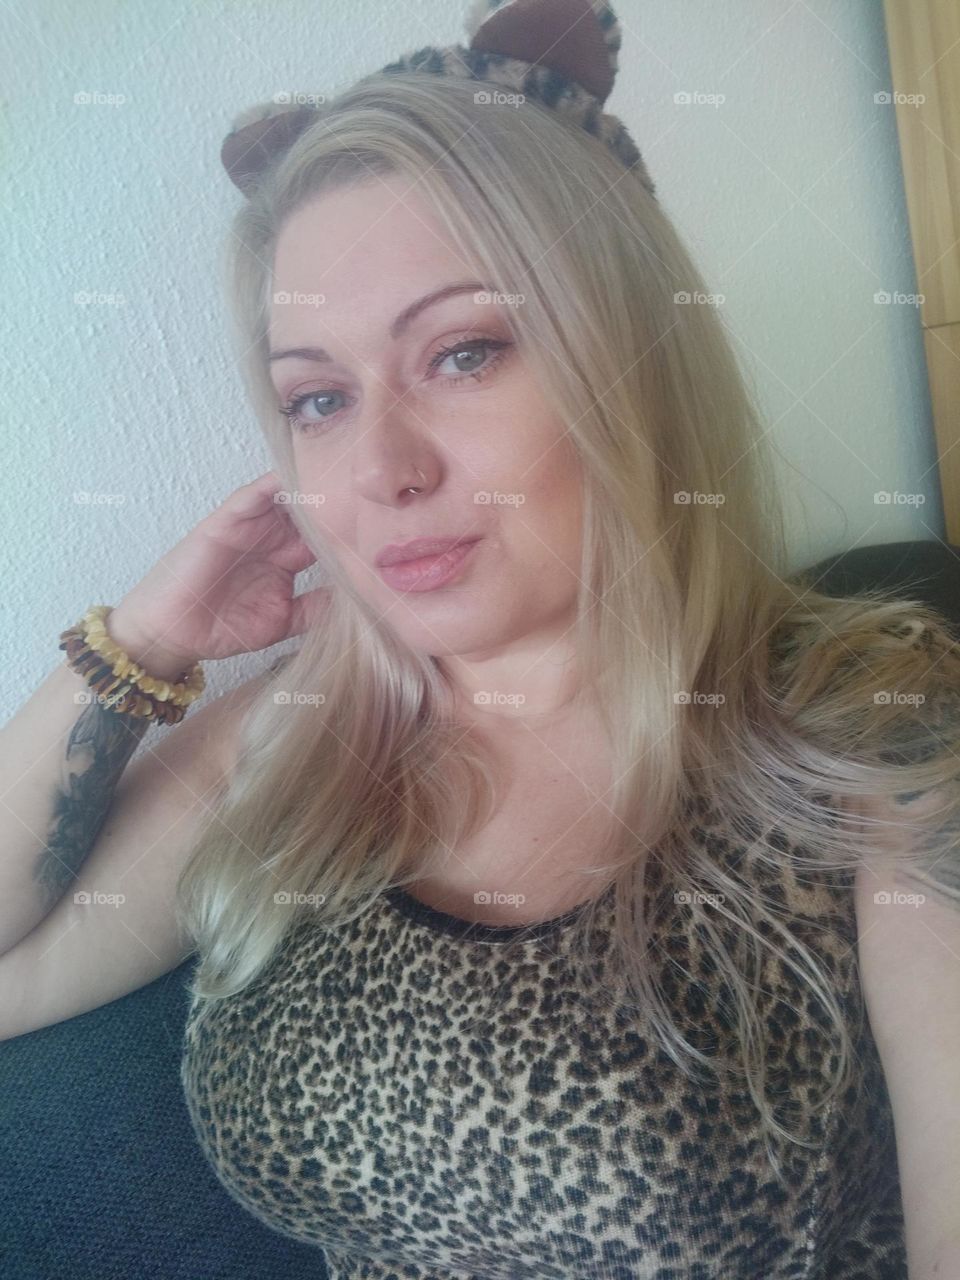 Selfie with leopard dress print and ears